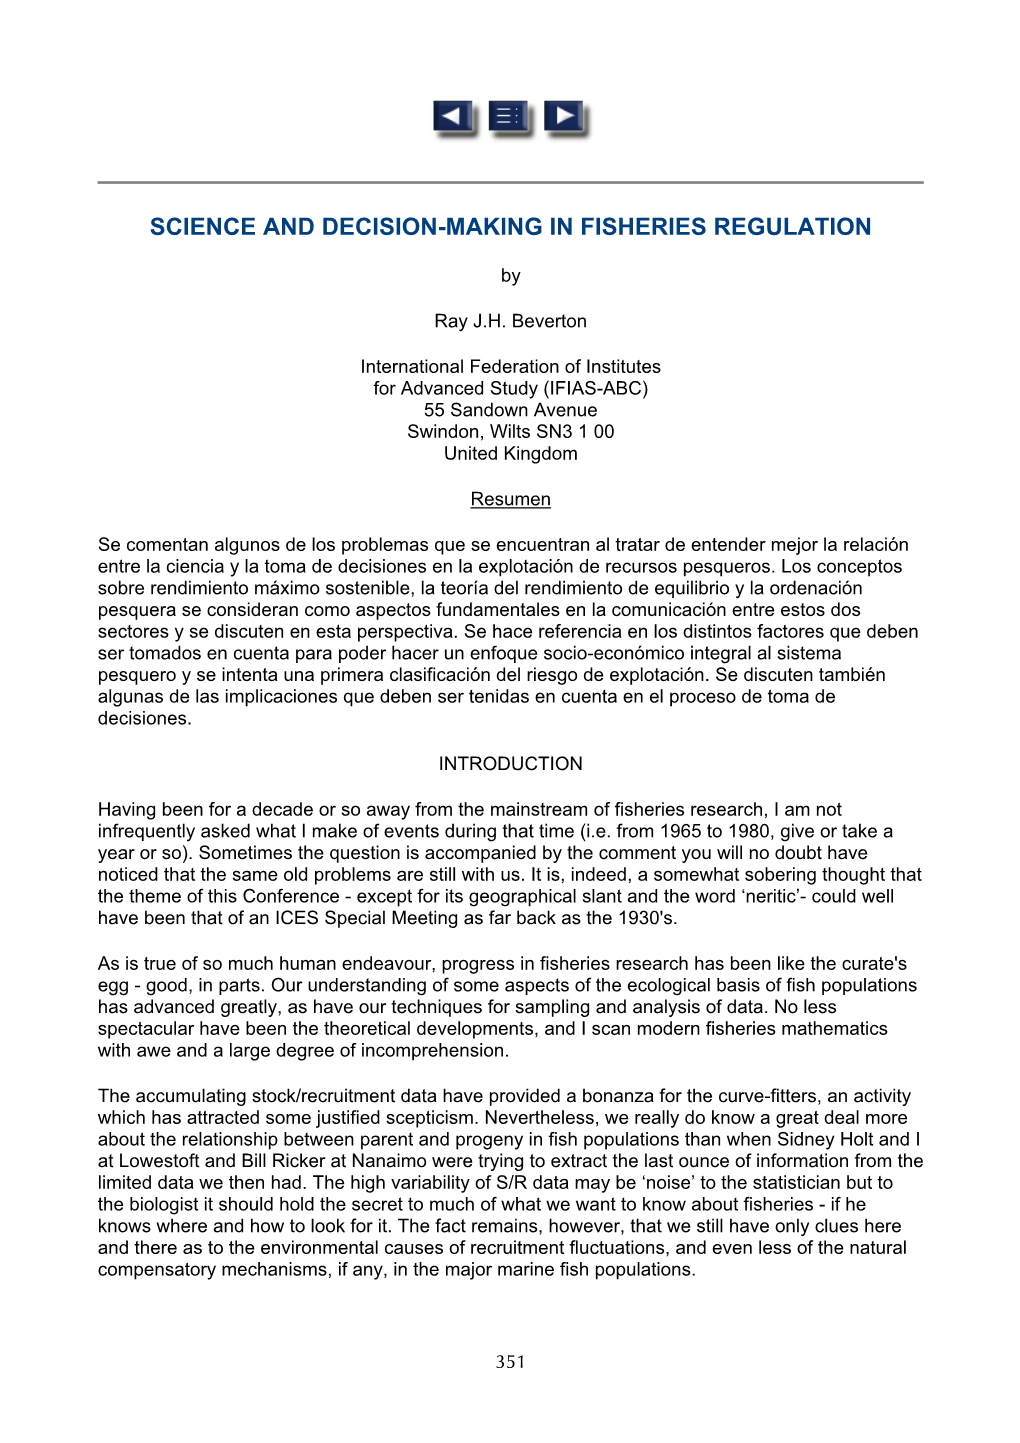 Science and Decision-Making in Fisheries Regulation